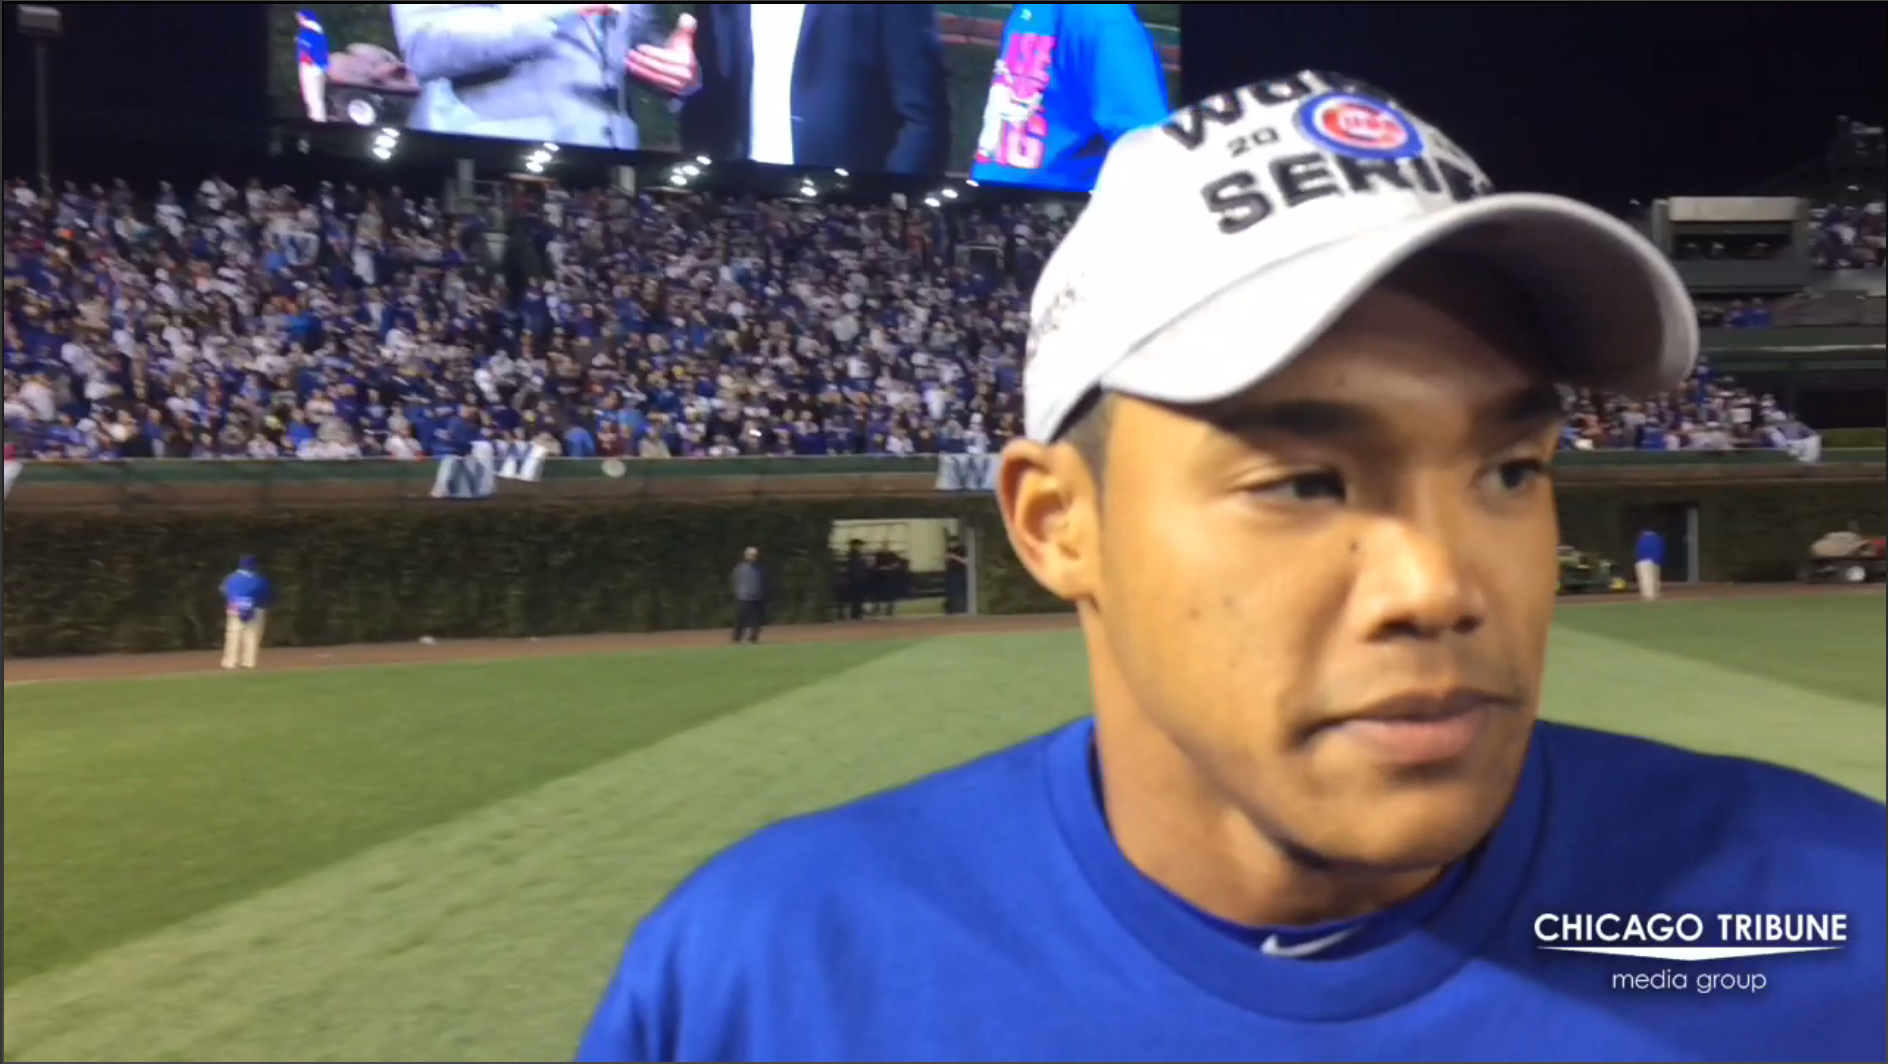 Addison Russell on advancing to World Series: 'There's no better feeling'